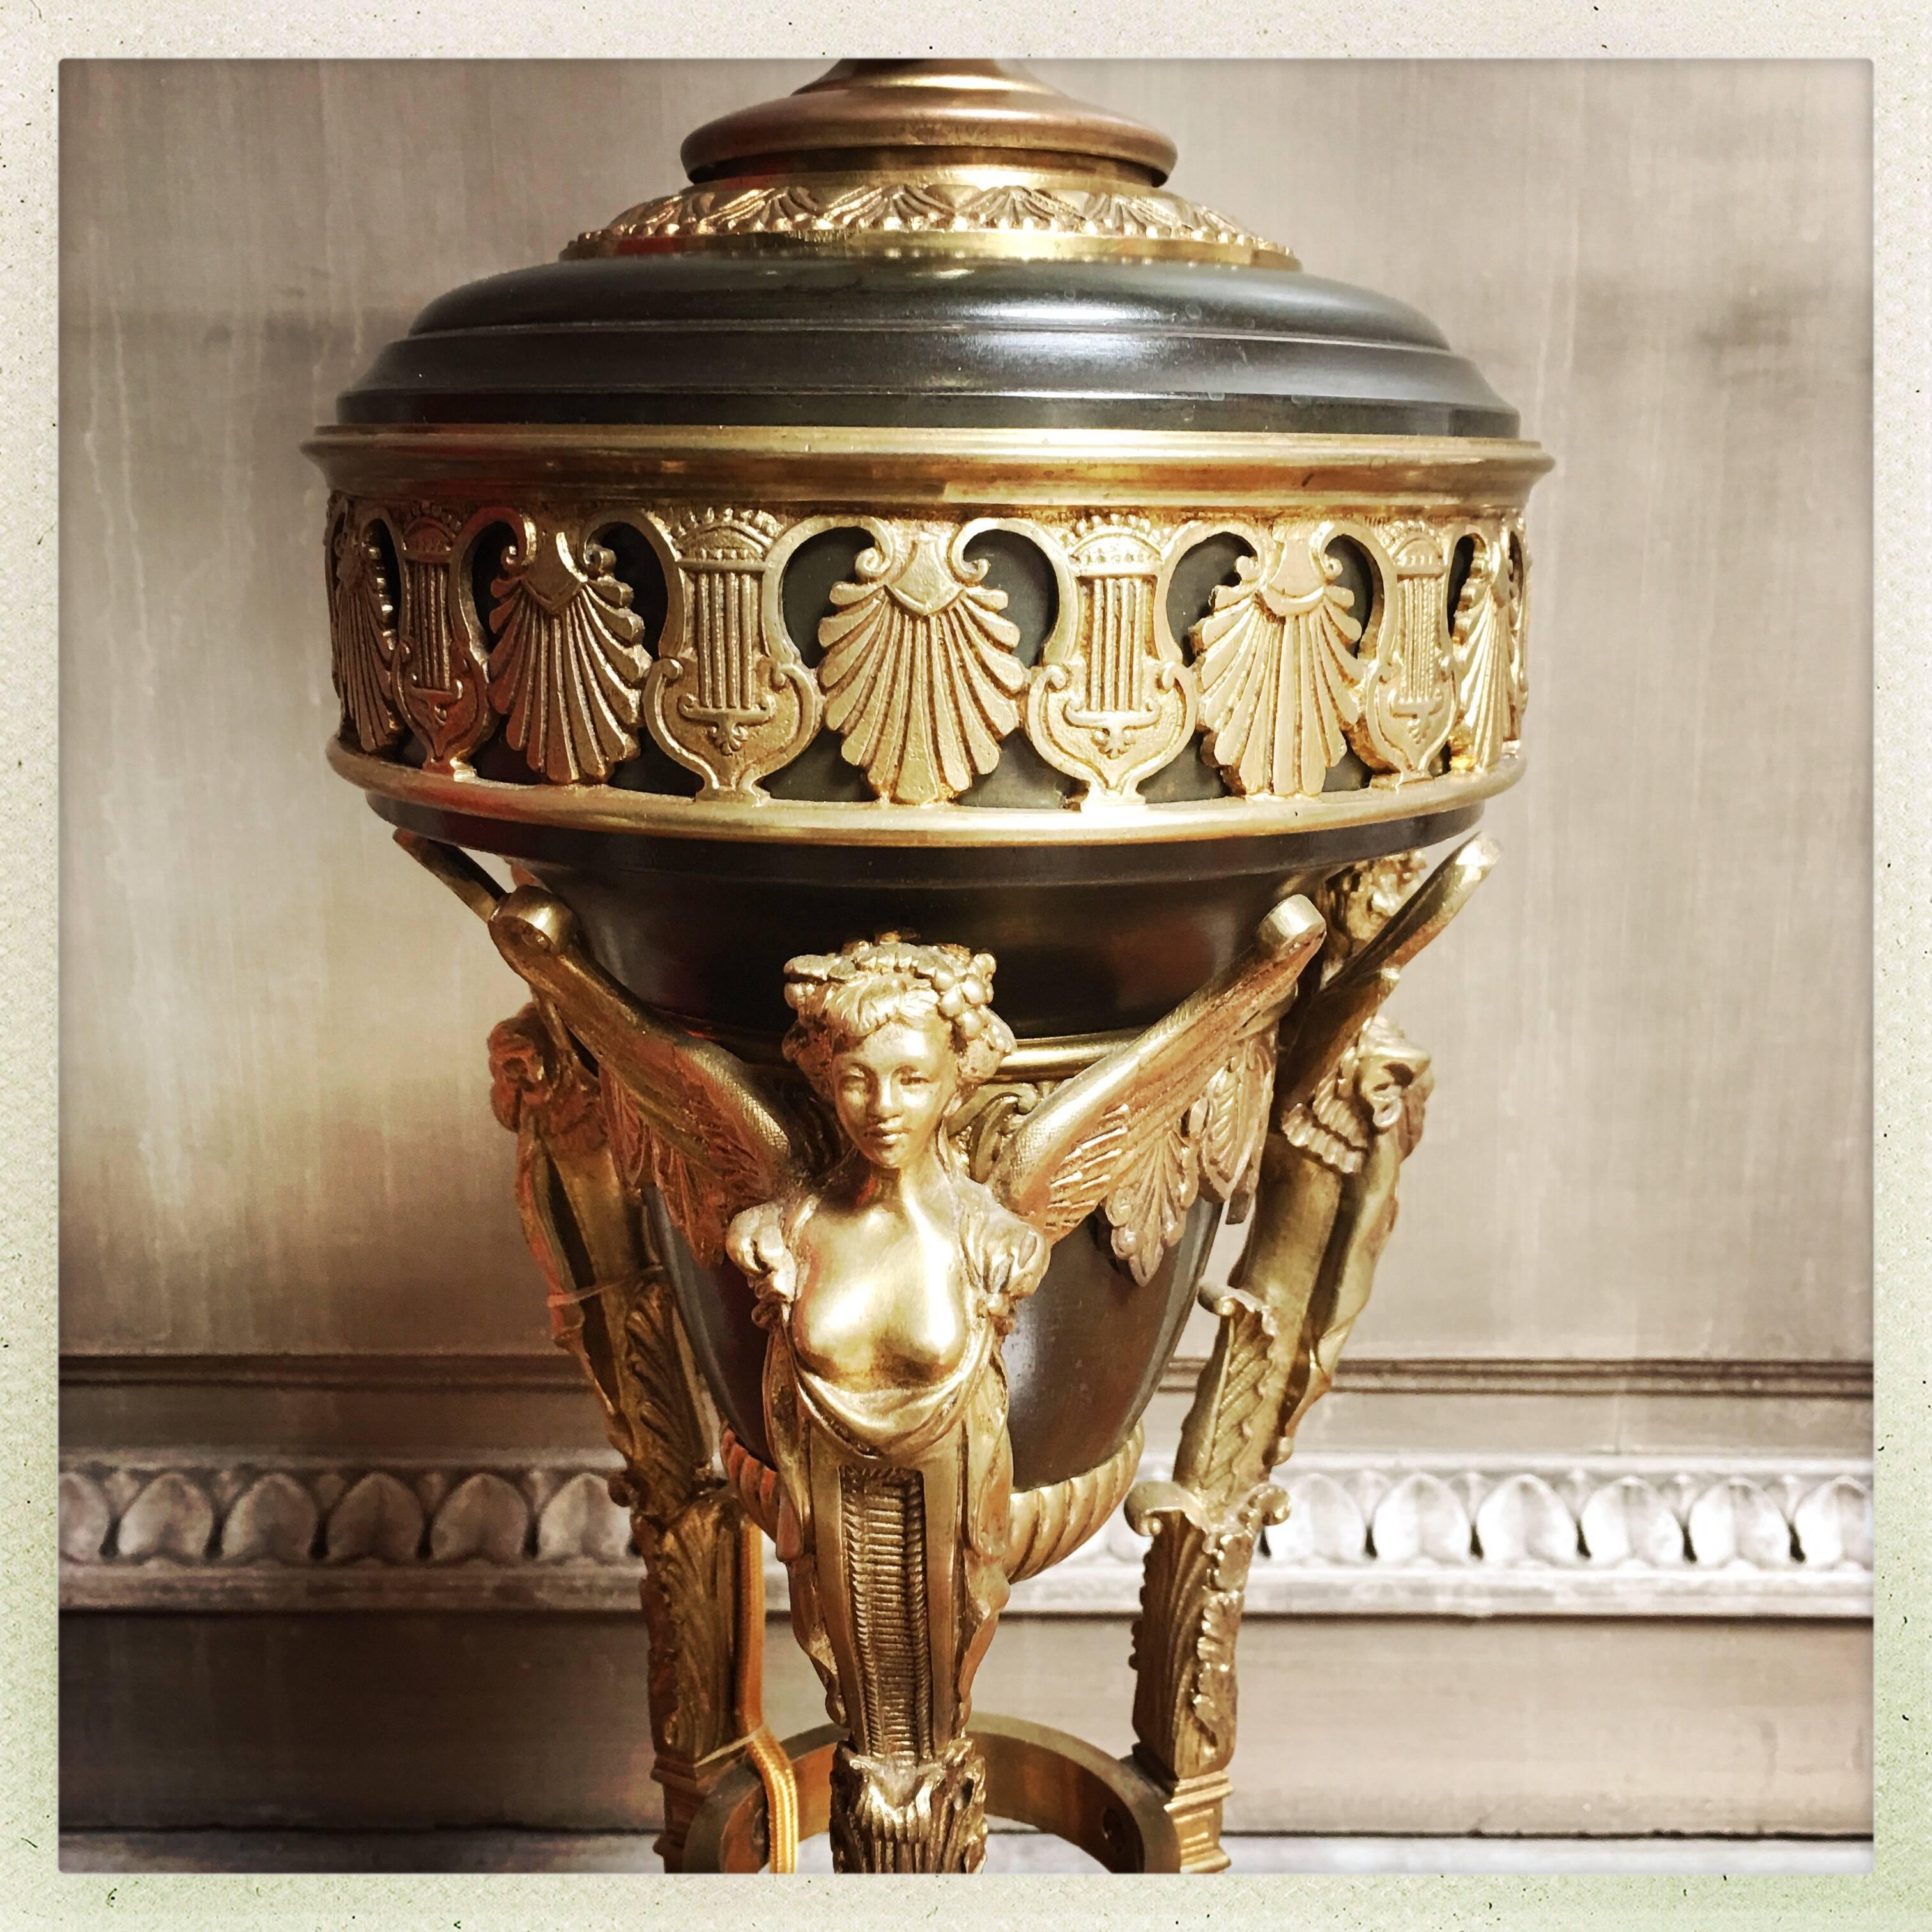 A French bronze 1st Empire style lamp base with winged figures.